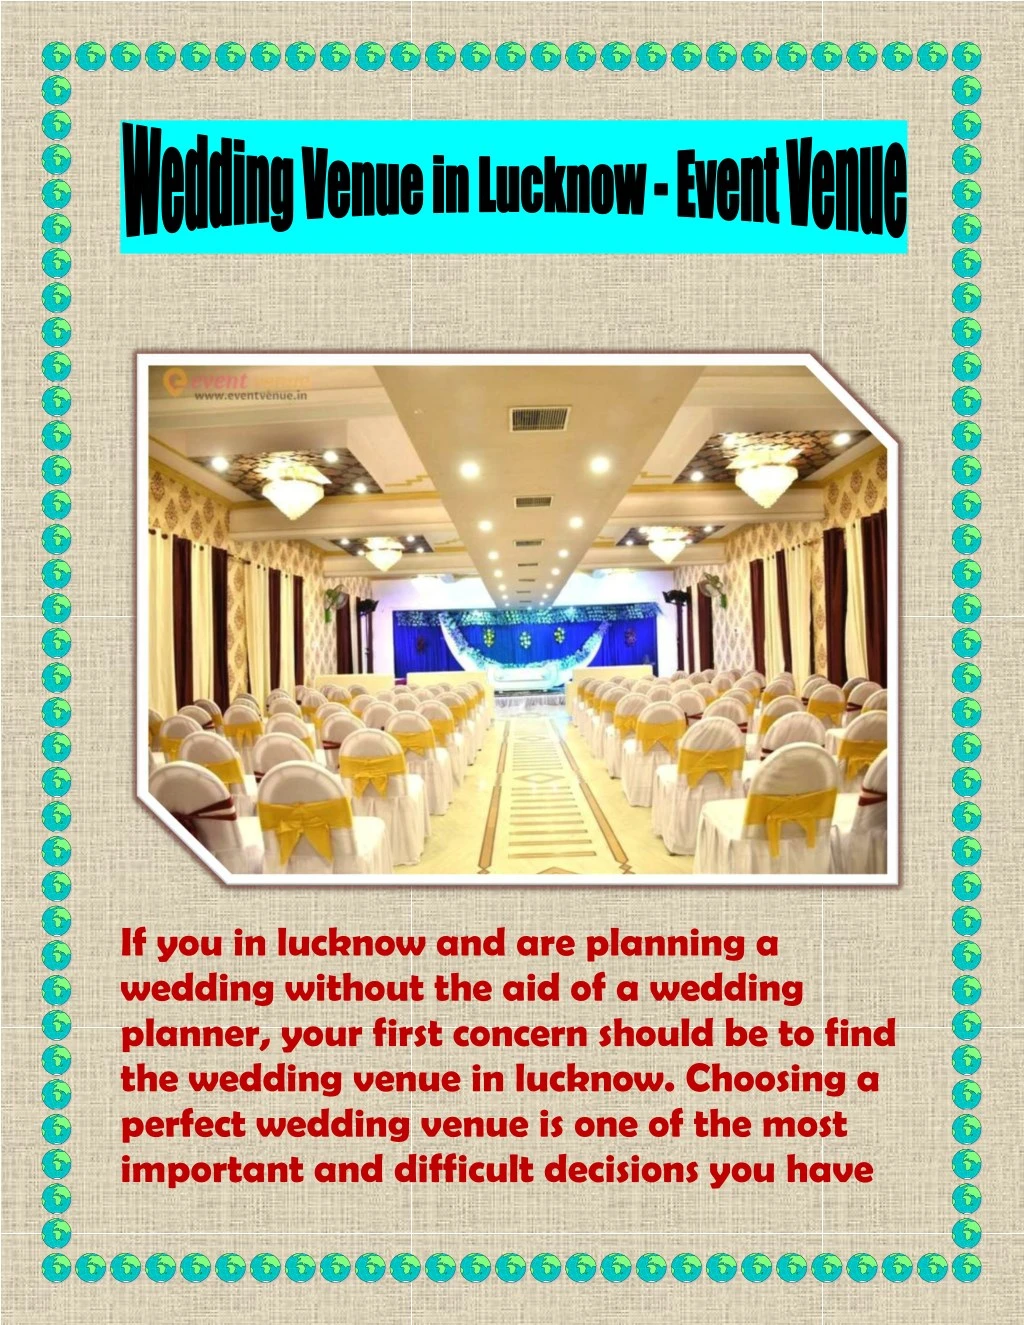 if you in lucknow and are planning a wedding